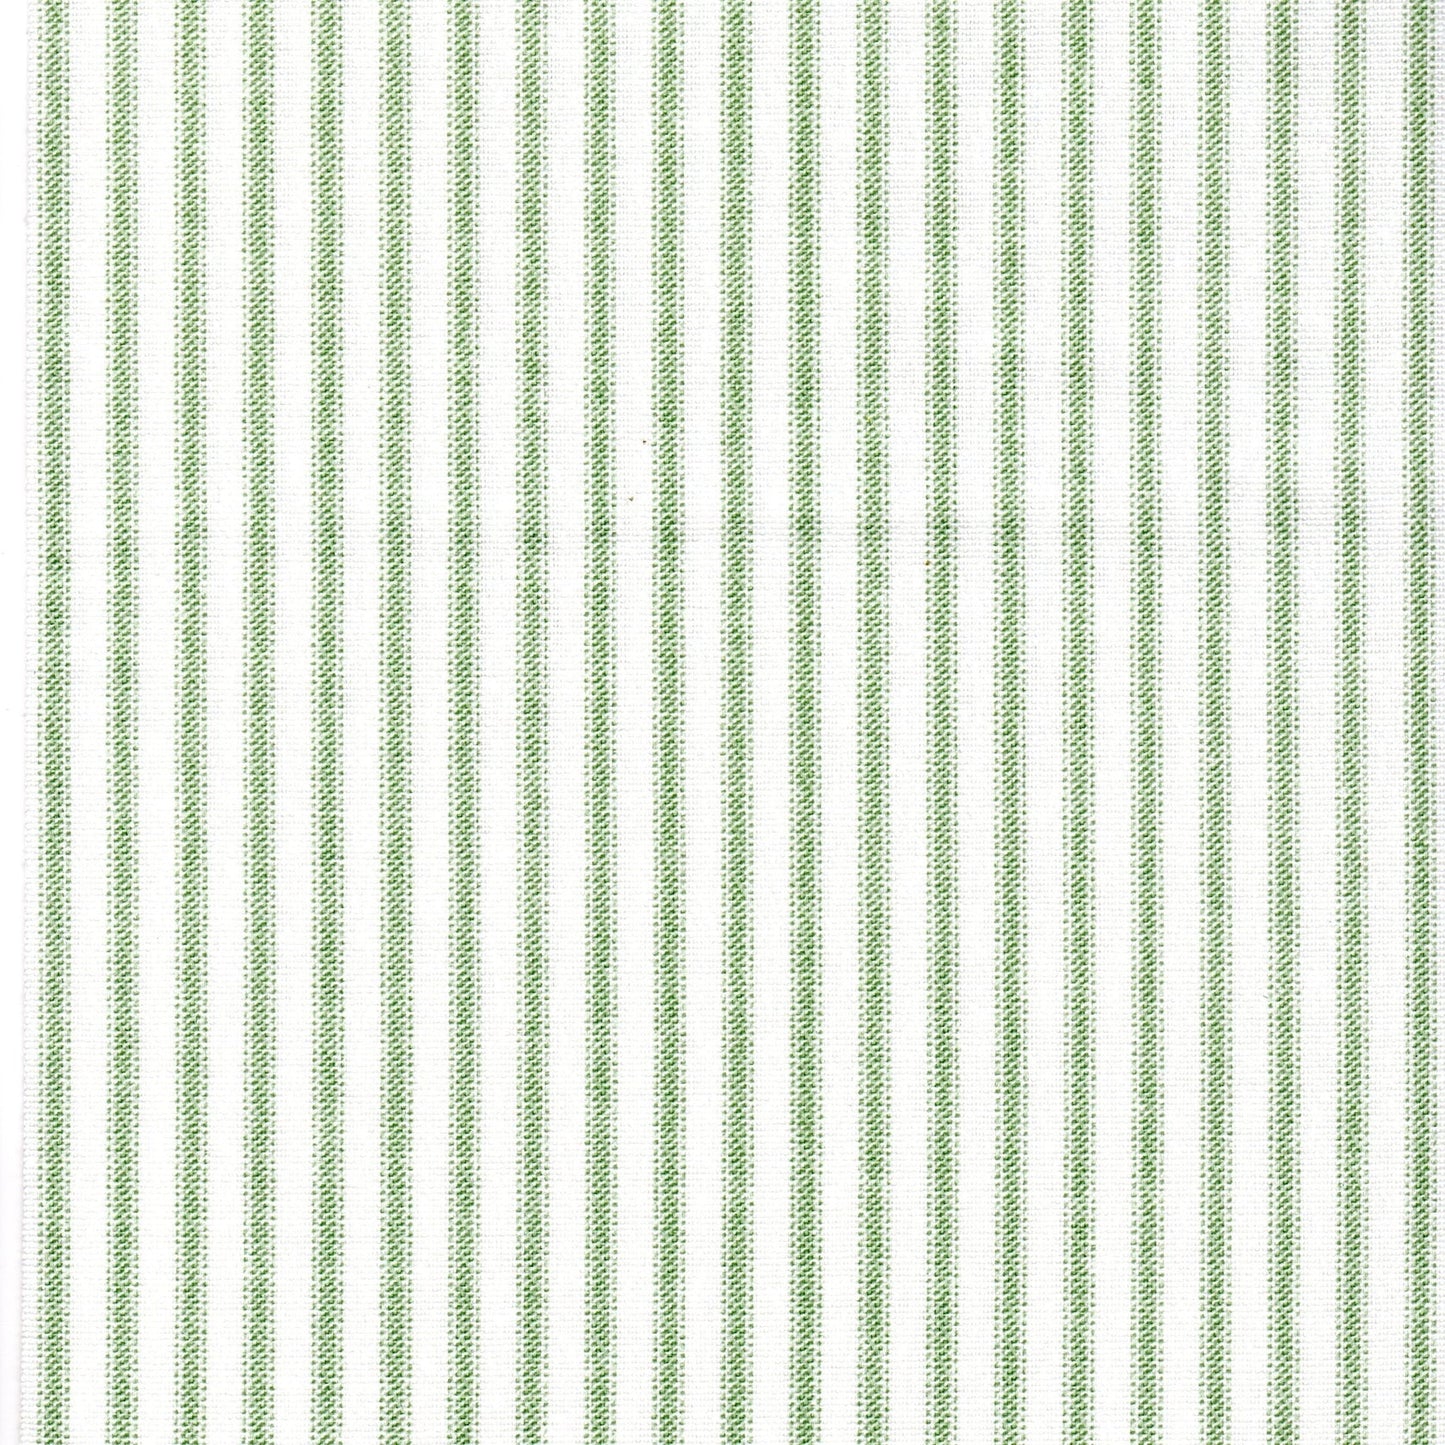 rod pocket curtains in Classic Sage Green Ticking Stripe on White